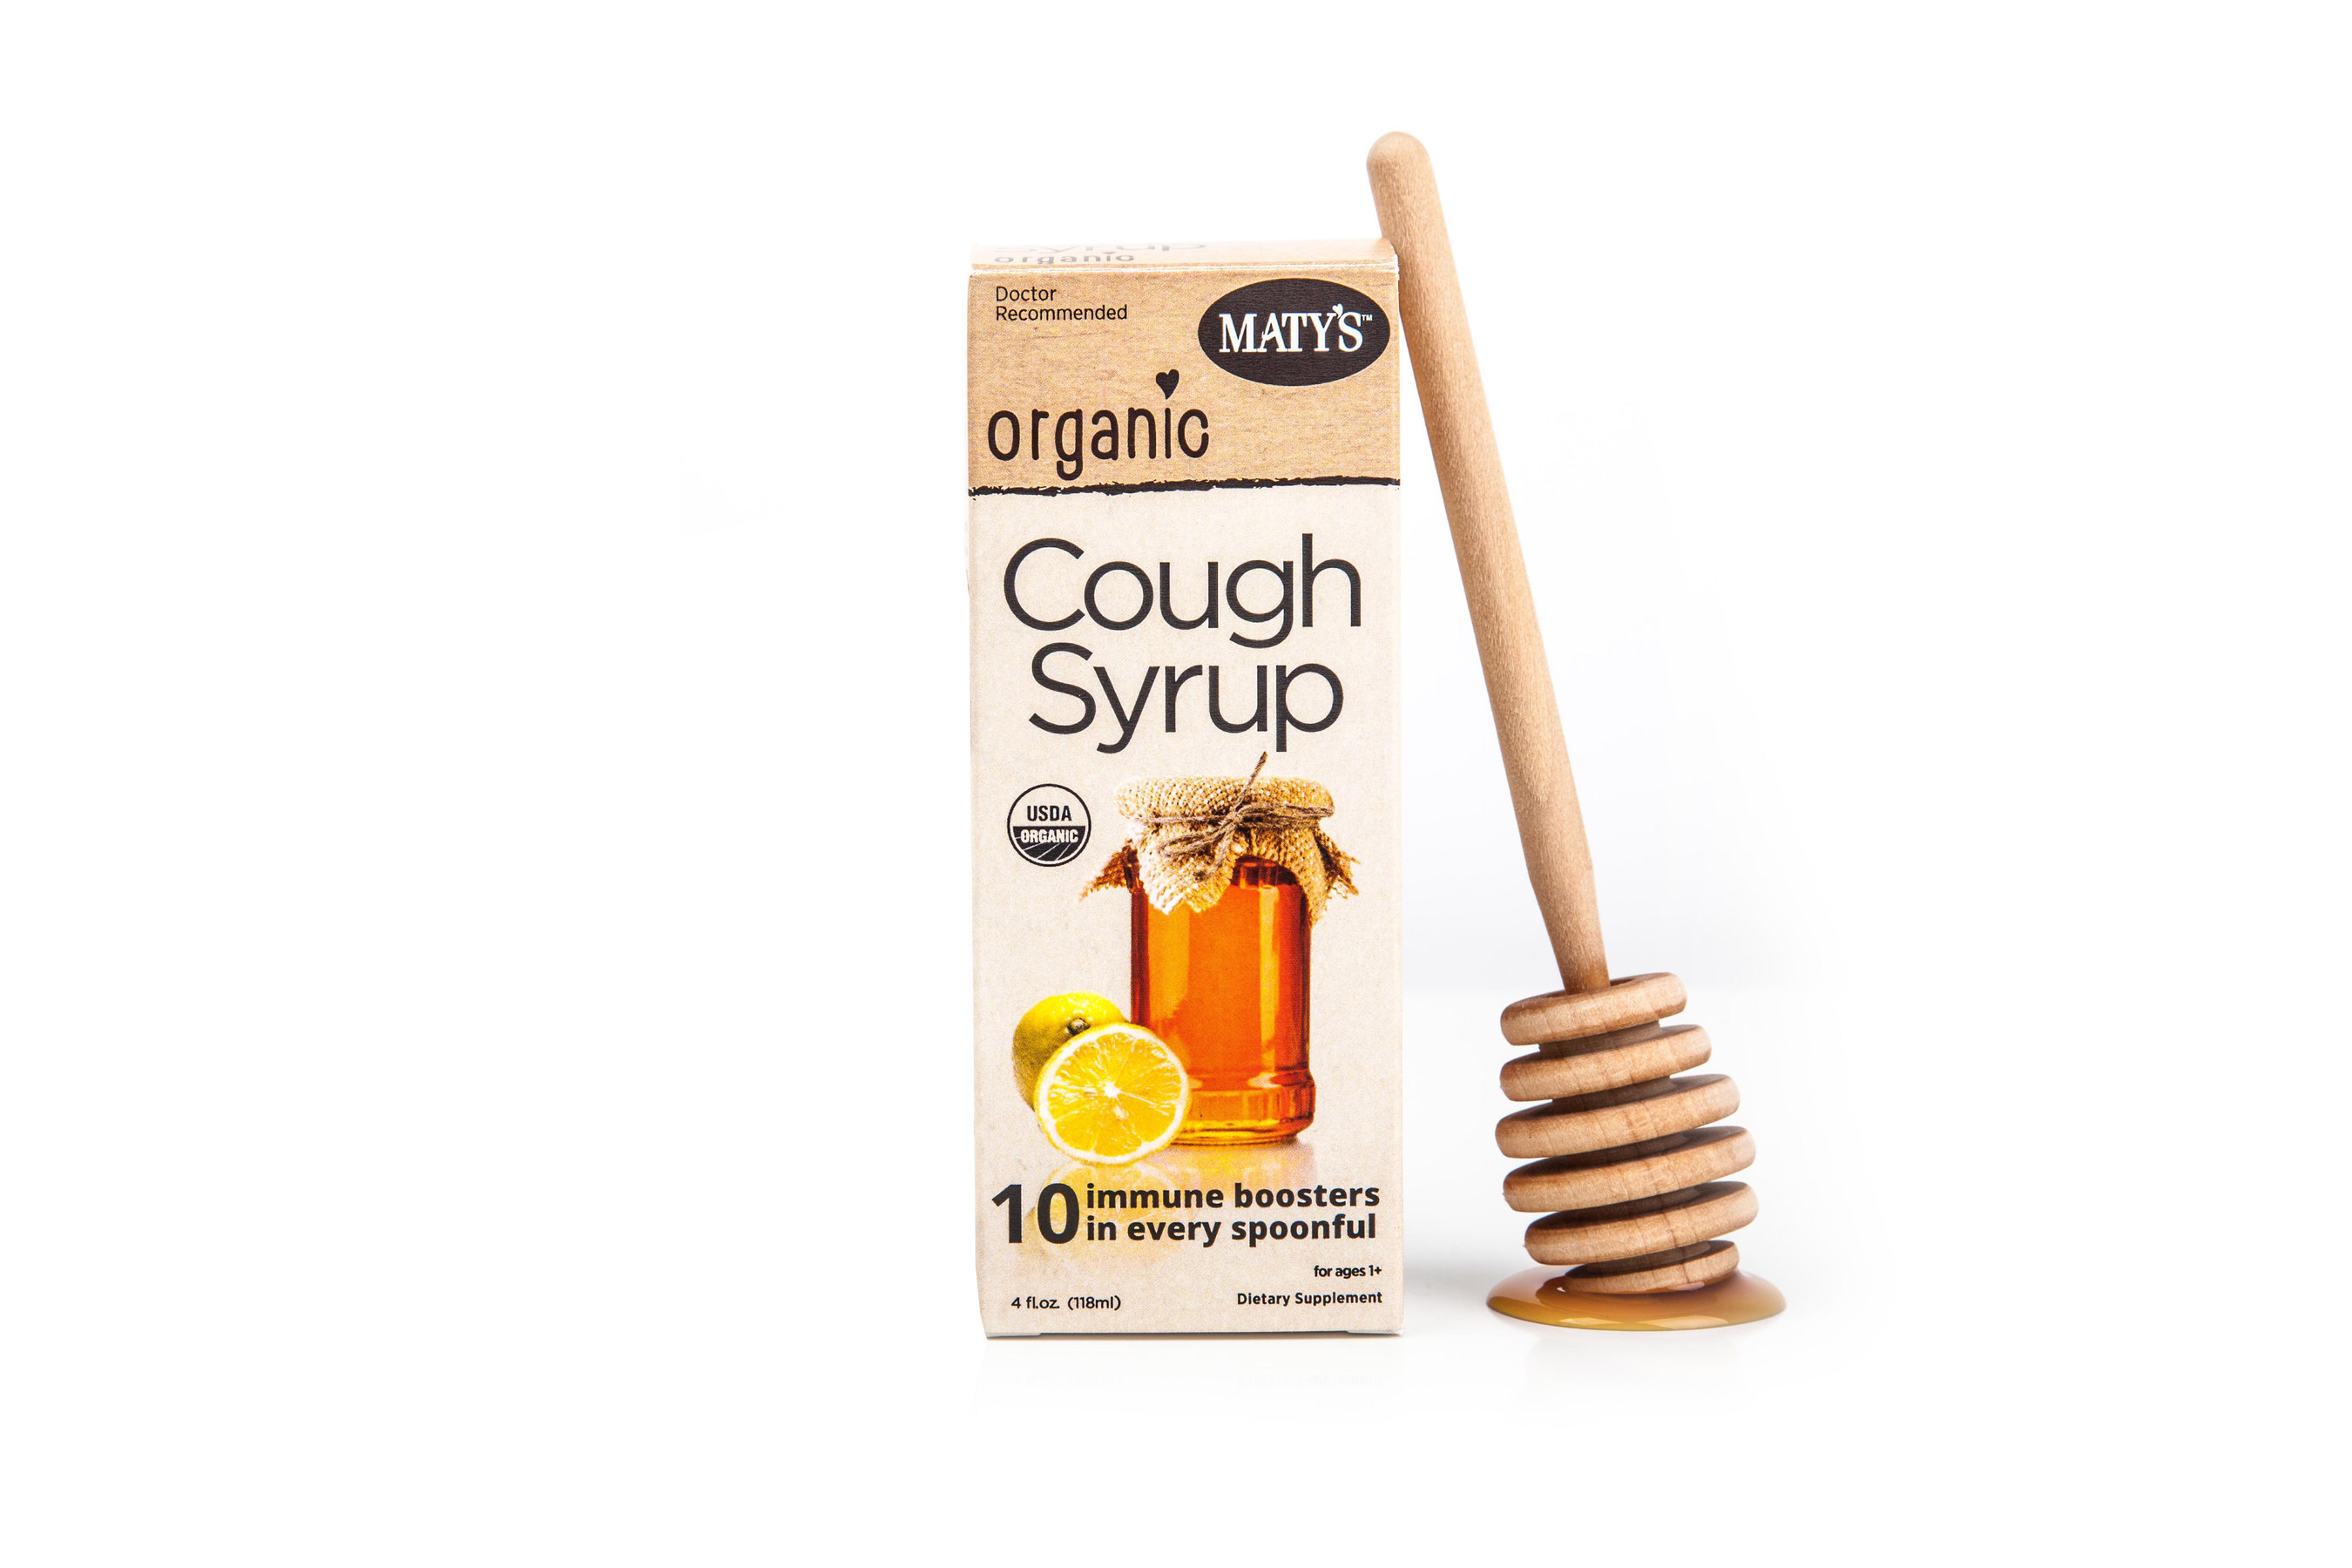 Maty's Healthy Products - First USDA Certified Organic Cough Syrup Available Nationwide